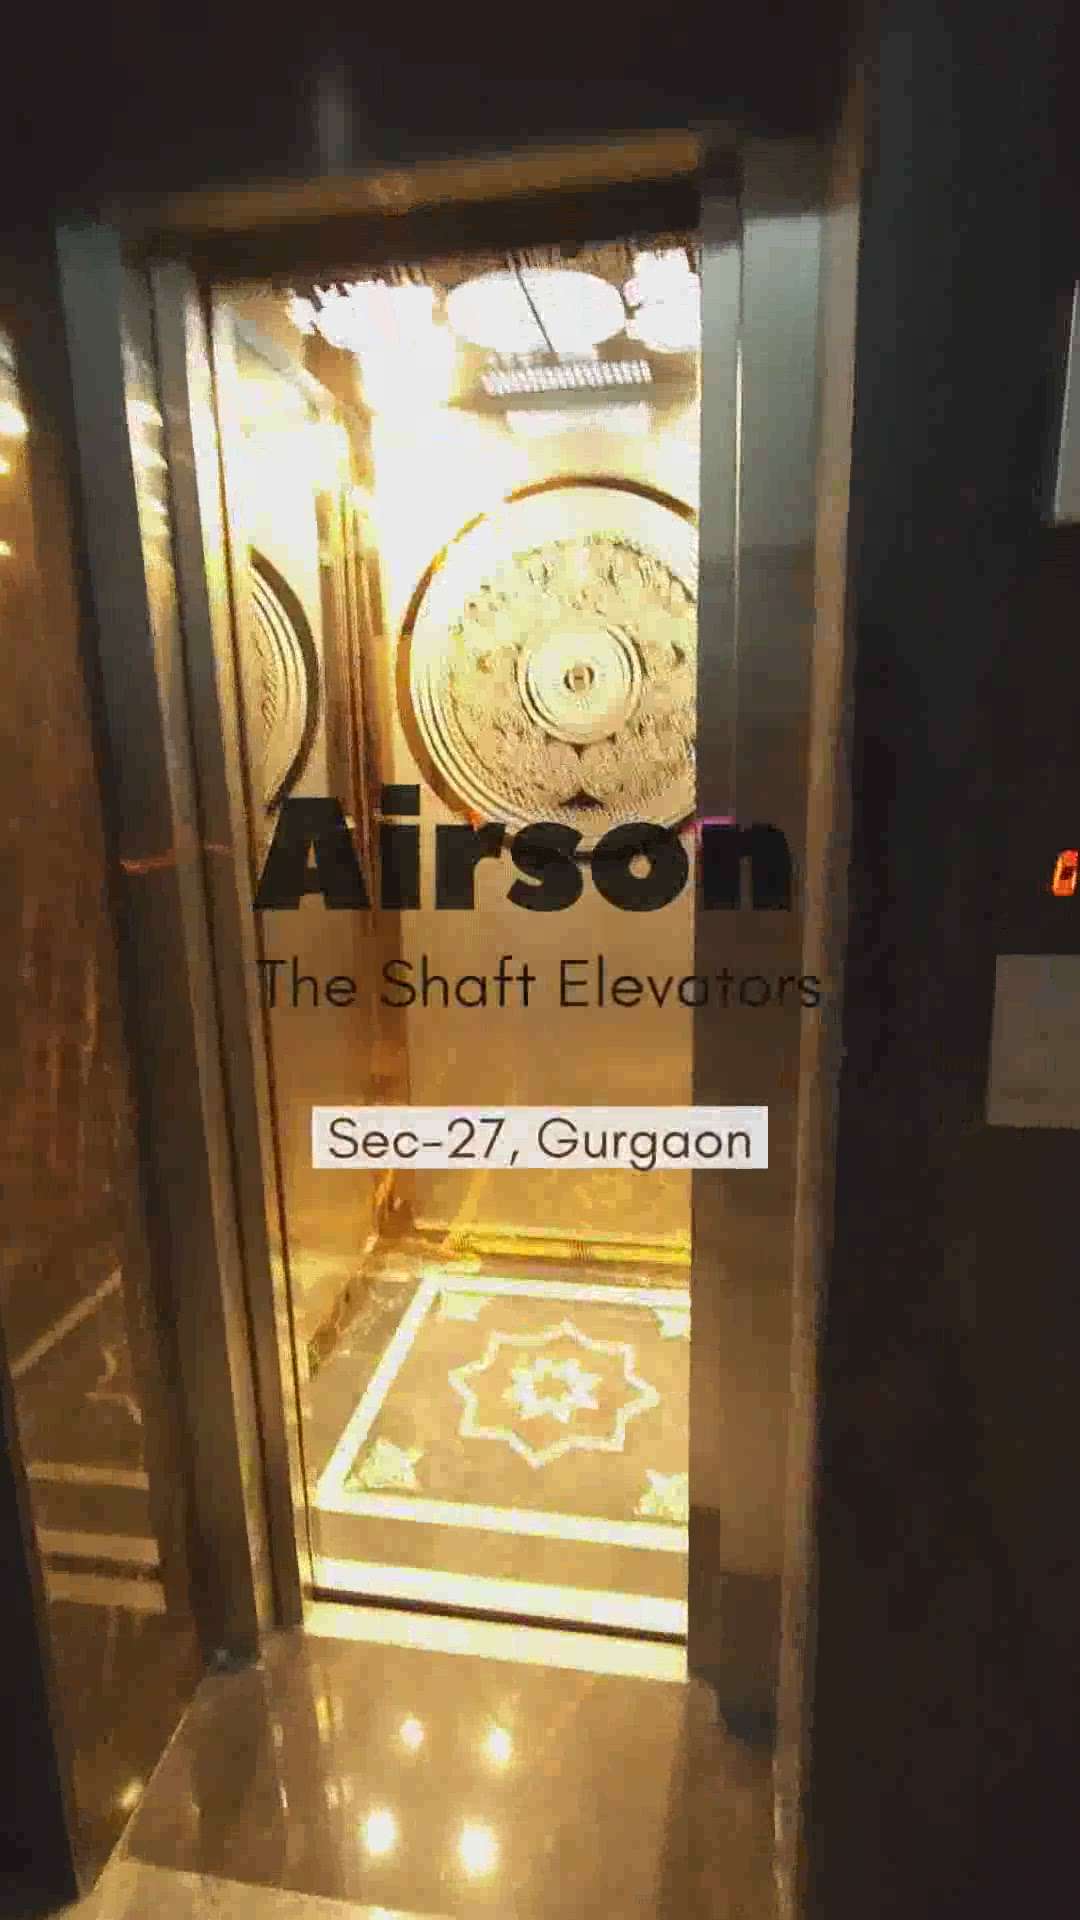 Machine Room Less Liift/Elevator | Glass Doors @ sector 27  Gurugram

This is the lift at Gurugram with Golden n Hairline finish Cabin with Glass DoorsThanks for watching

Lift Information:Year : 2022
Floors Served : 6 (G,1,2,3,4,5)
Type : Machine Room Traction lift
liftCapacity : 6 Passengers, 408kg
Speed : 01 Mps 

For Enquiry 
Contact +91 9968348545
Airson The Shaft Elevator's Team
theshaftelevators@gmail.com
airsonelevators1313@gmail.com  #liftdesing #lift #liftinterior #elevators #goldensteel #homeelevator